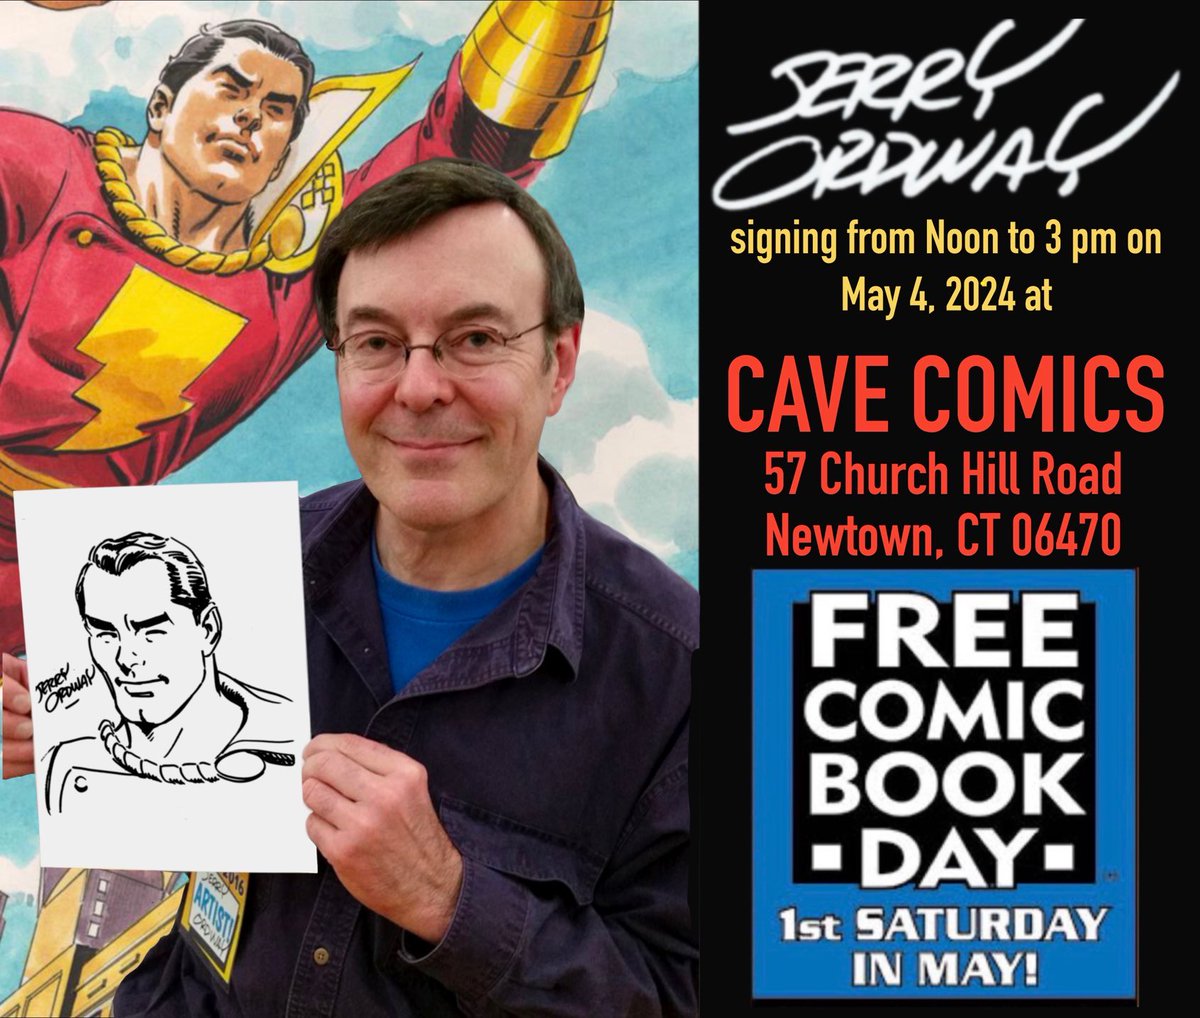 Come see me on Saturday May 4th at Cave Comics in Newtown CT, for Free Comic Book Day. I’ll be signing and selling comics and prints from noon until three pm. #freecomicbookday